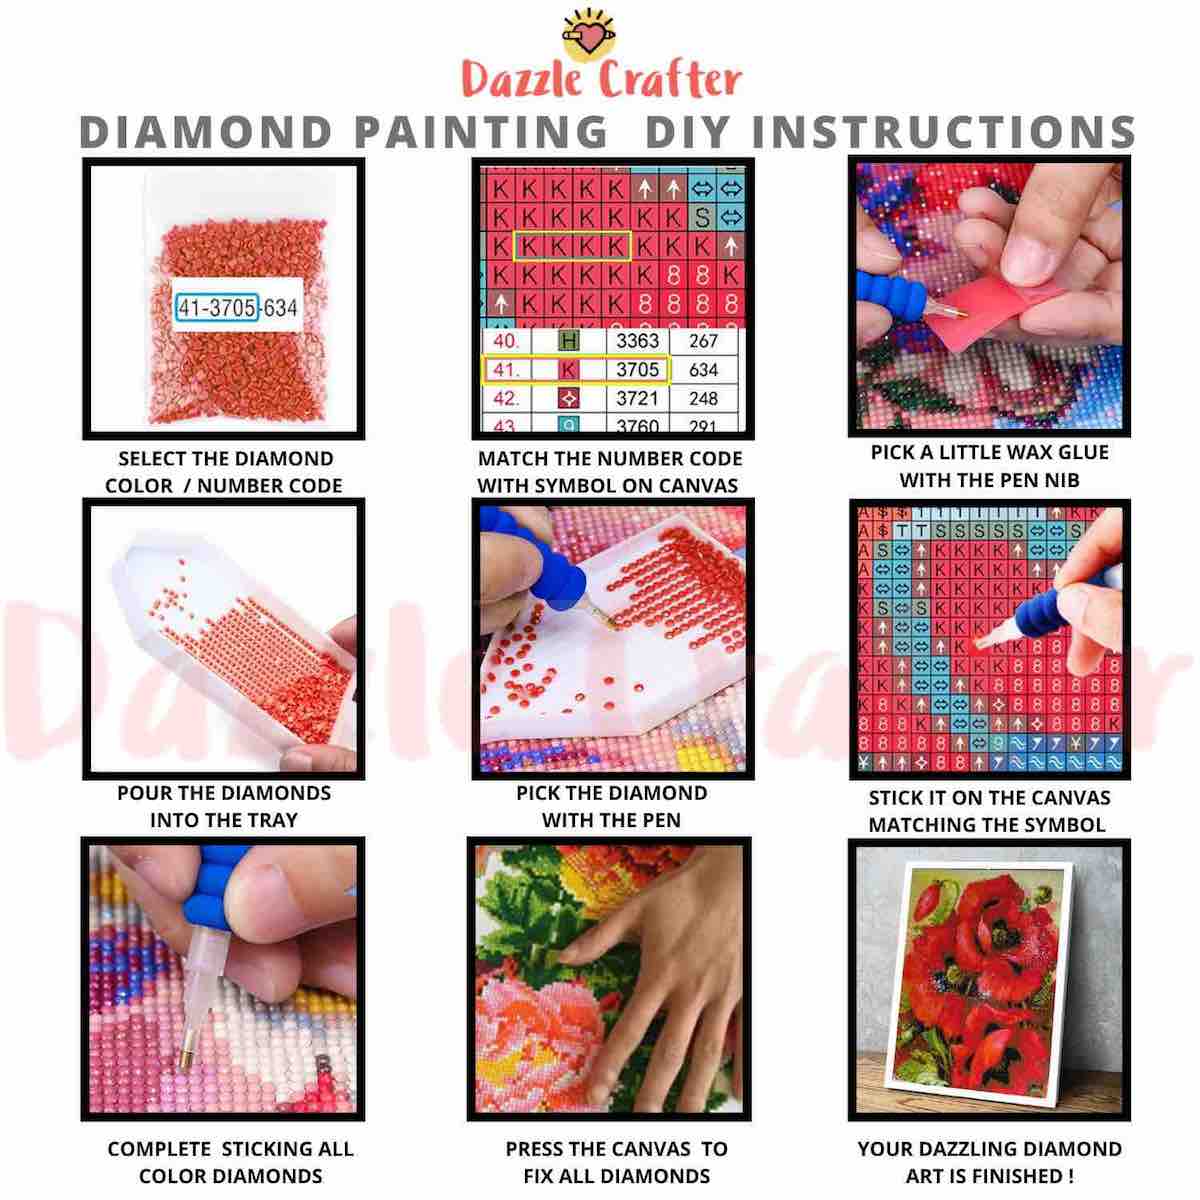 DIY INSTRUCTIONS FOR DIAMOND PAINTING